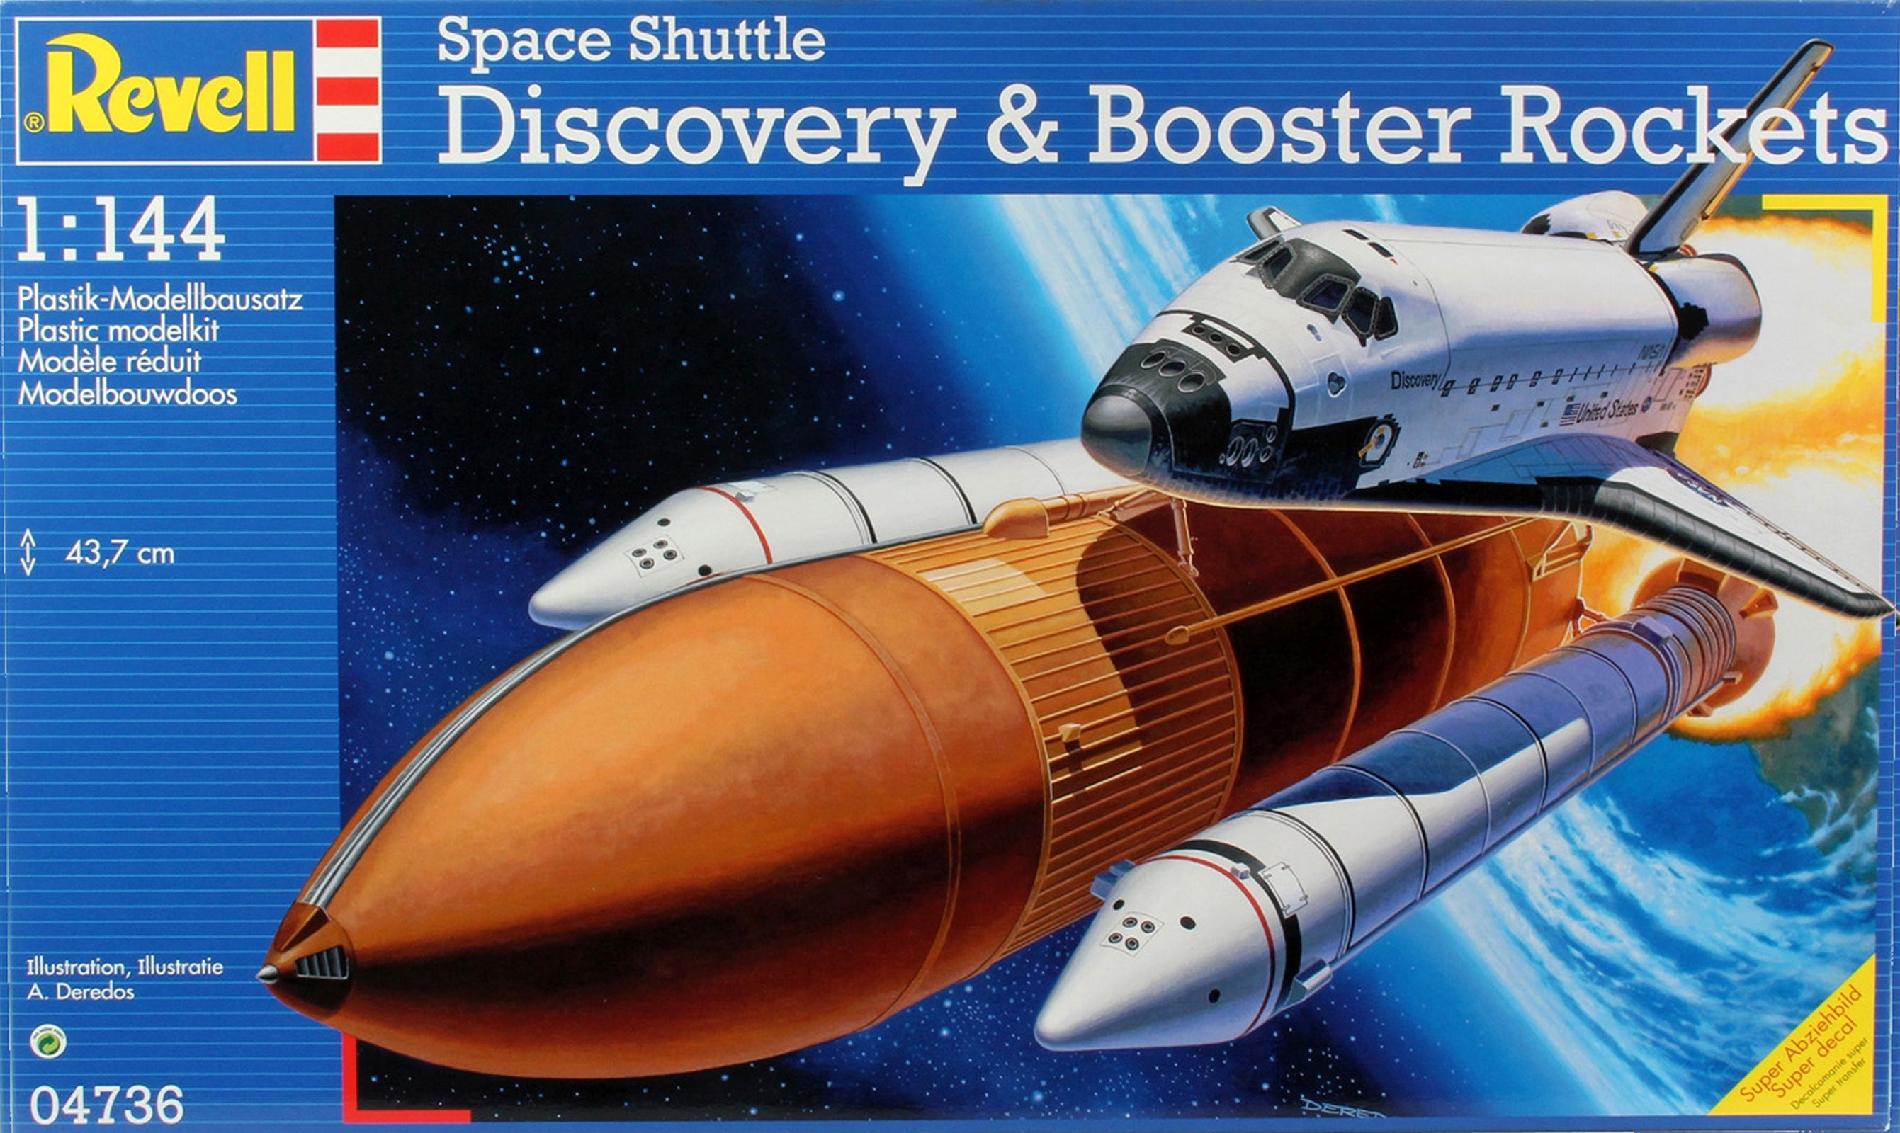 Revell 1:144 Scale Space Shuttle Discovery Model Kit